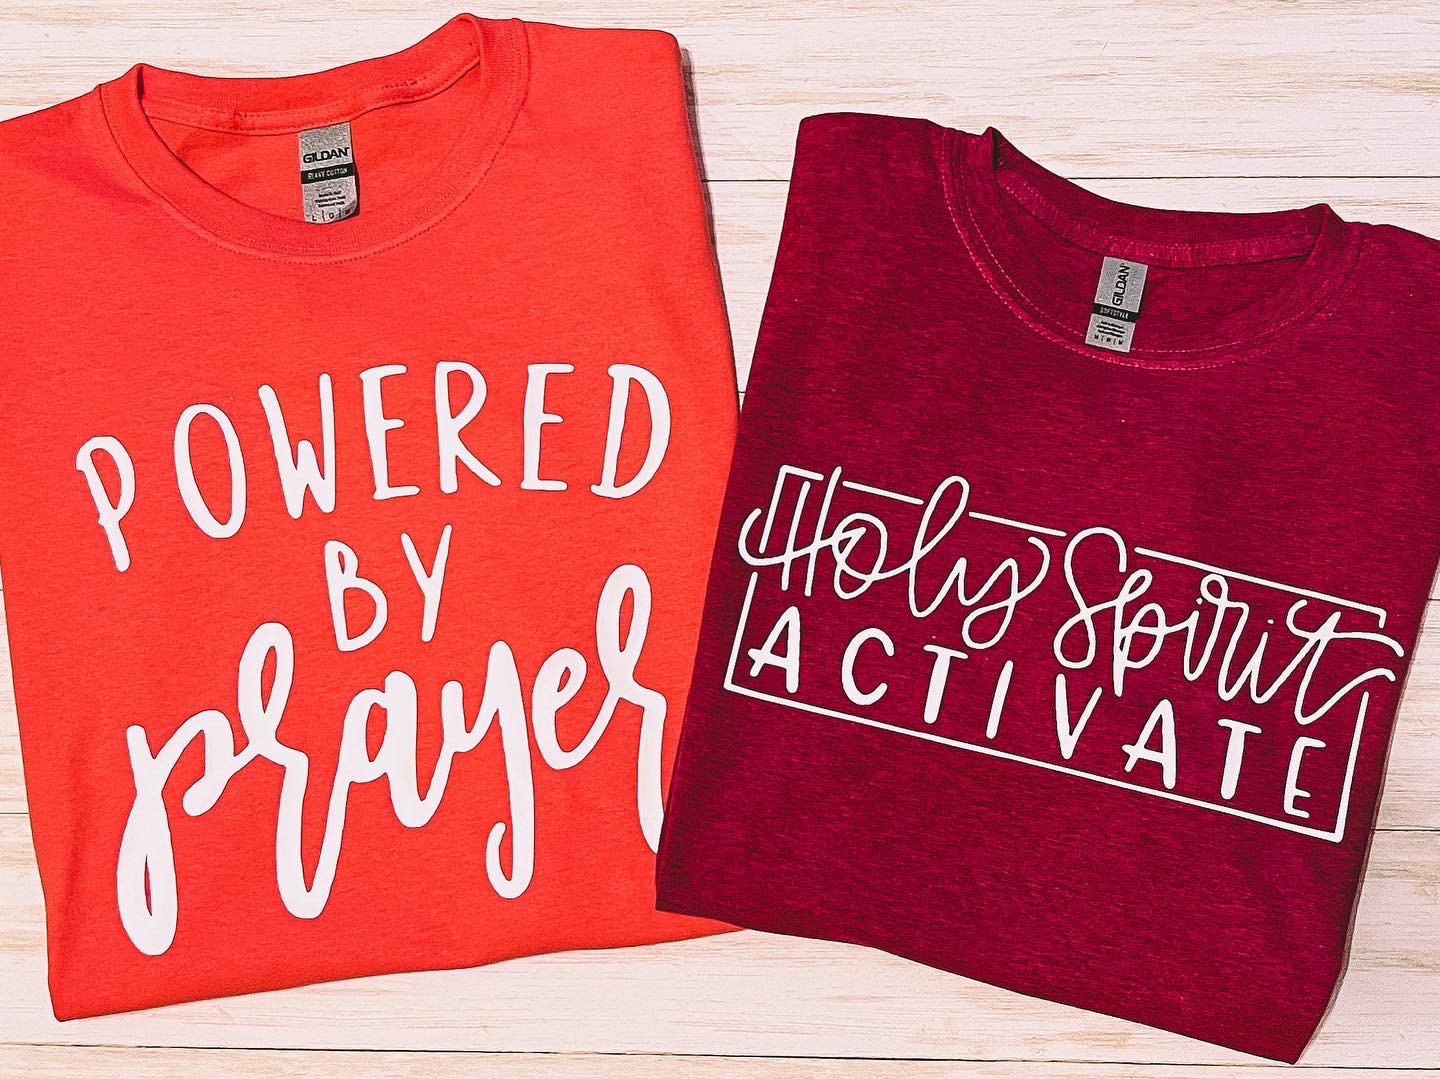 Holy Spirit Activate Tee